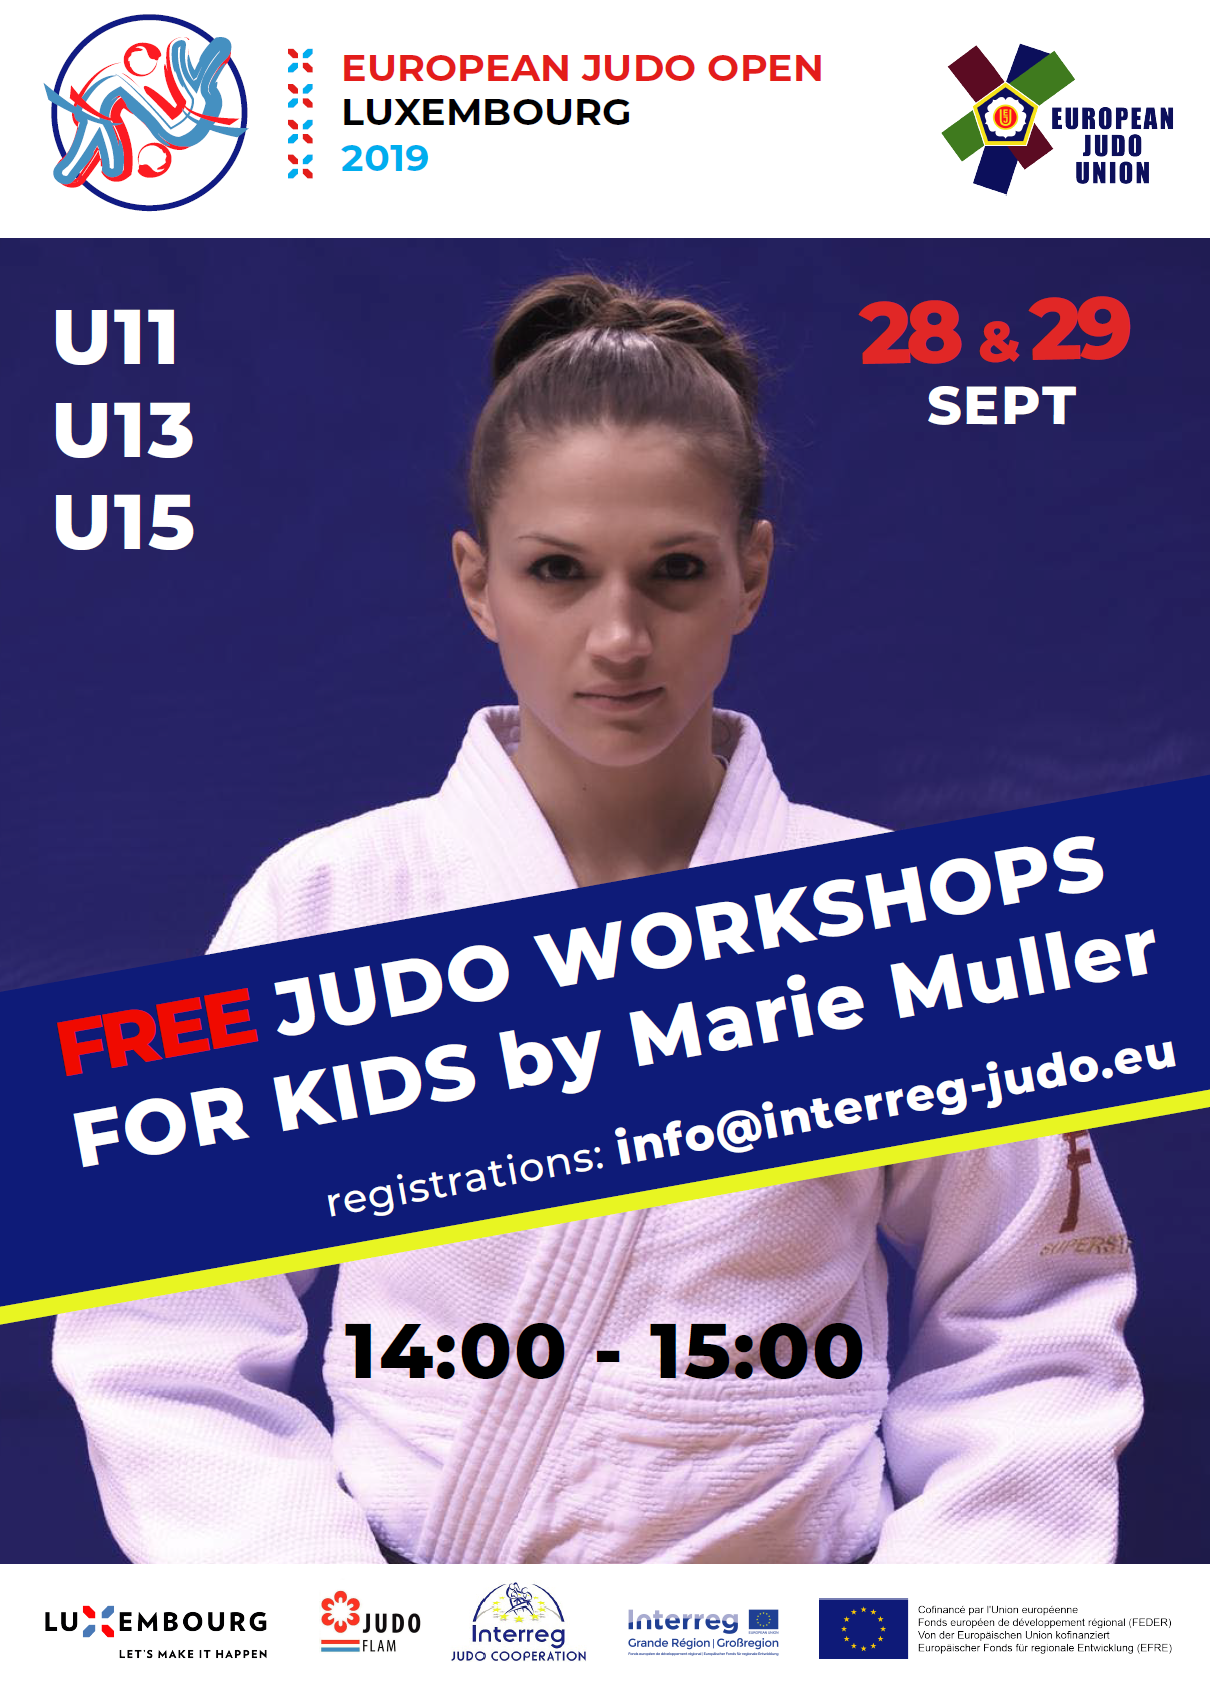 Free Workshops for Kids by Marie Muller